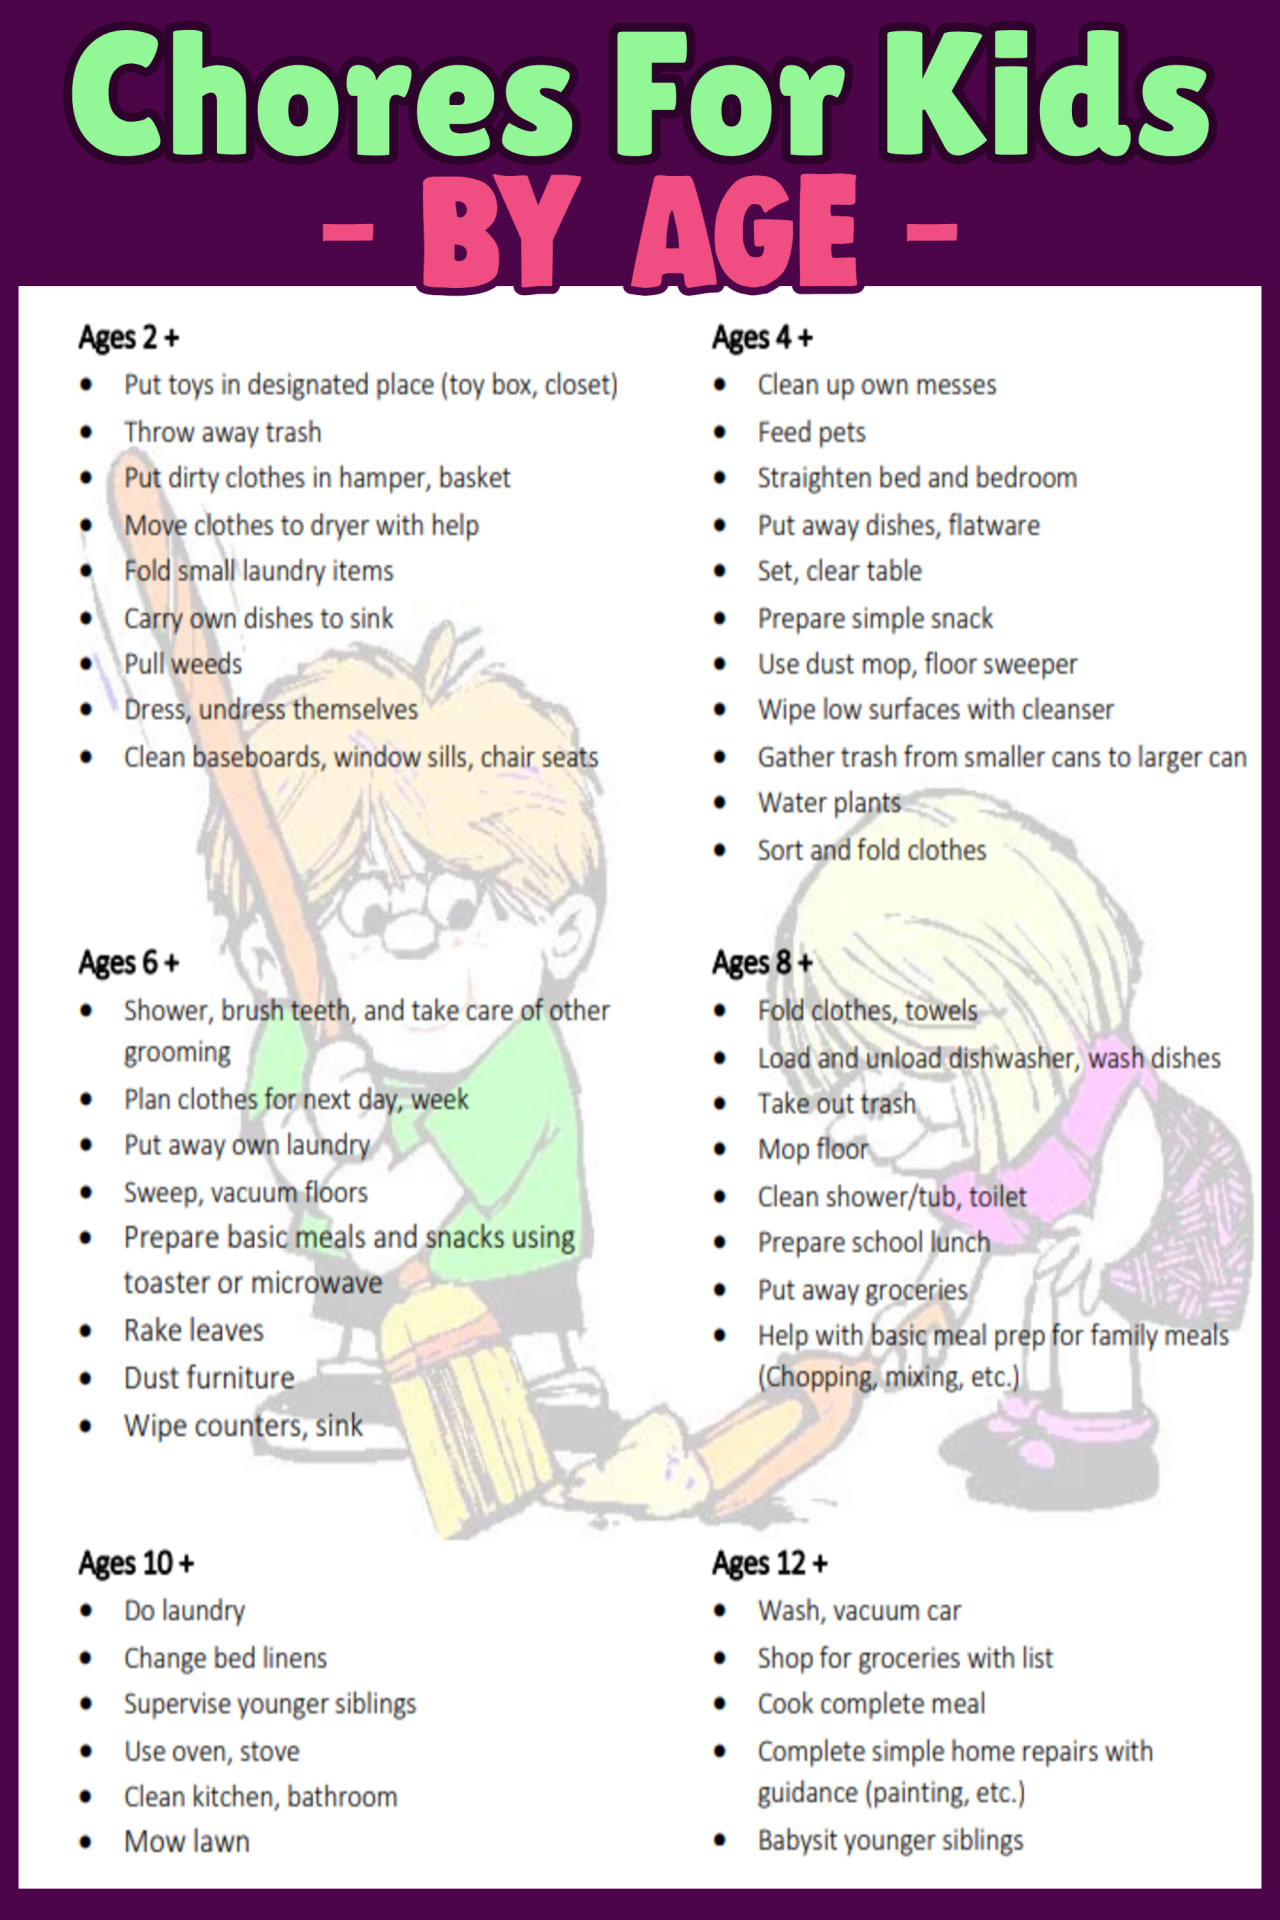 Chores for kids by age - chores for kids for homemade chore chart ideas - age appropriate chores for kids - house chores, daily chores and household chores for kids of all ages - teens, 4, 5 6, 7, 8 years old - 10,100,12 year old tweens, perschool and toddlers chore lists too